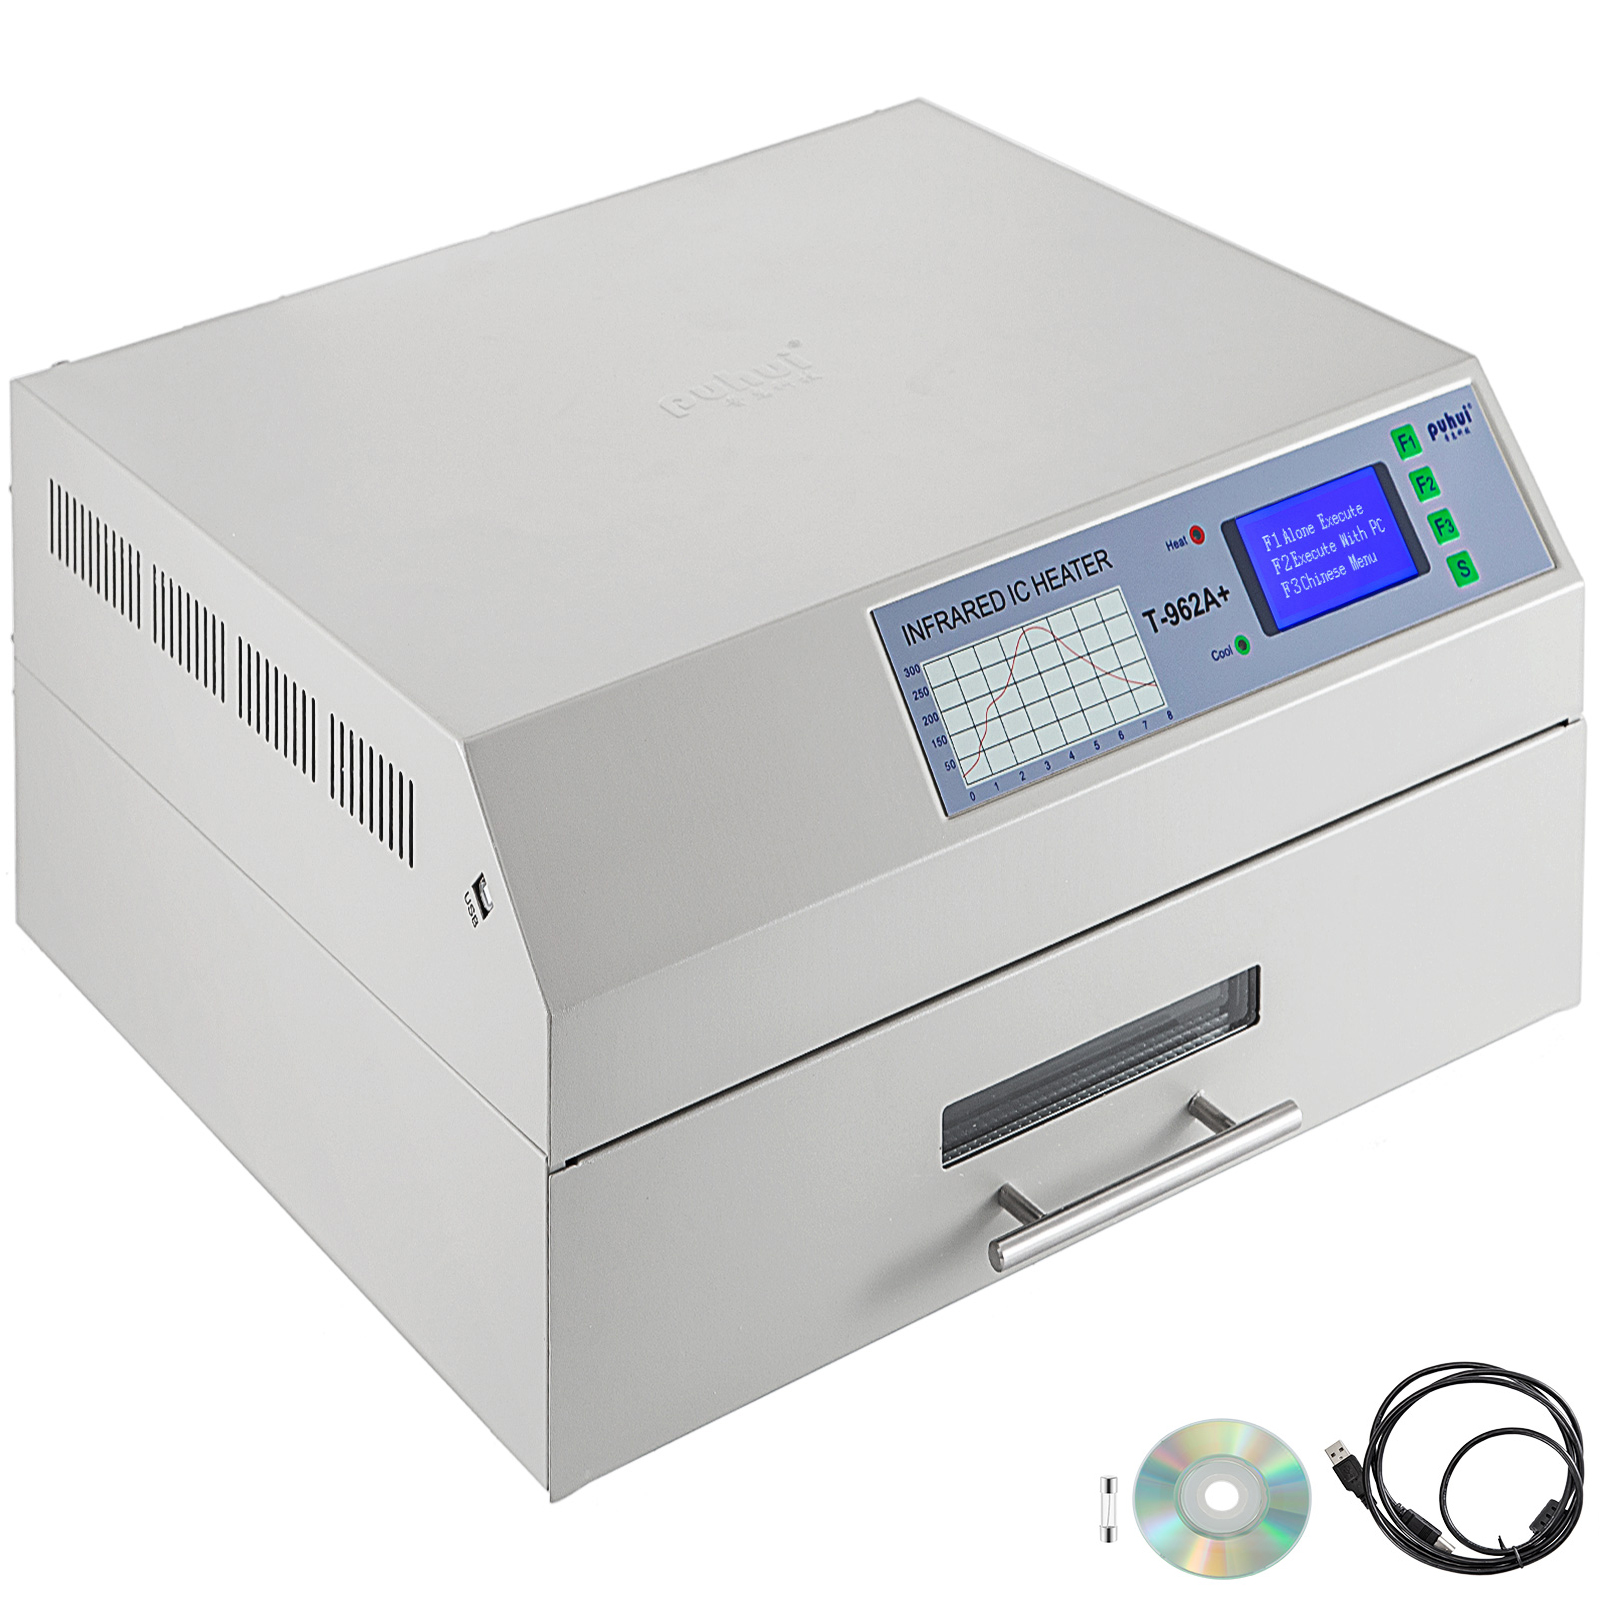 Reflow Oven, 800W T962 Automatic Reflow Soldering Machine, 180 X 235 Mm  Professional Heater, Hot Air Circulation, Eight Temperature Parameter  Waves